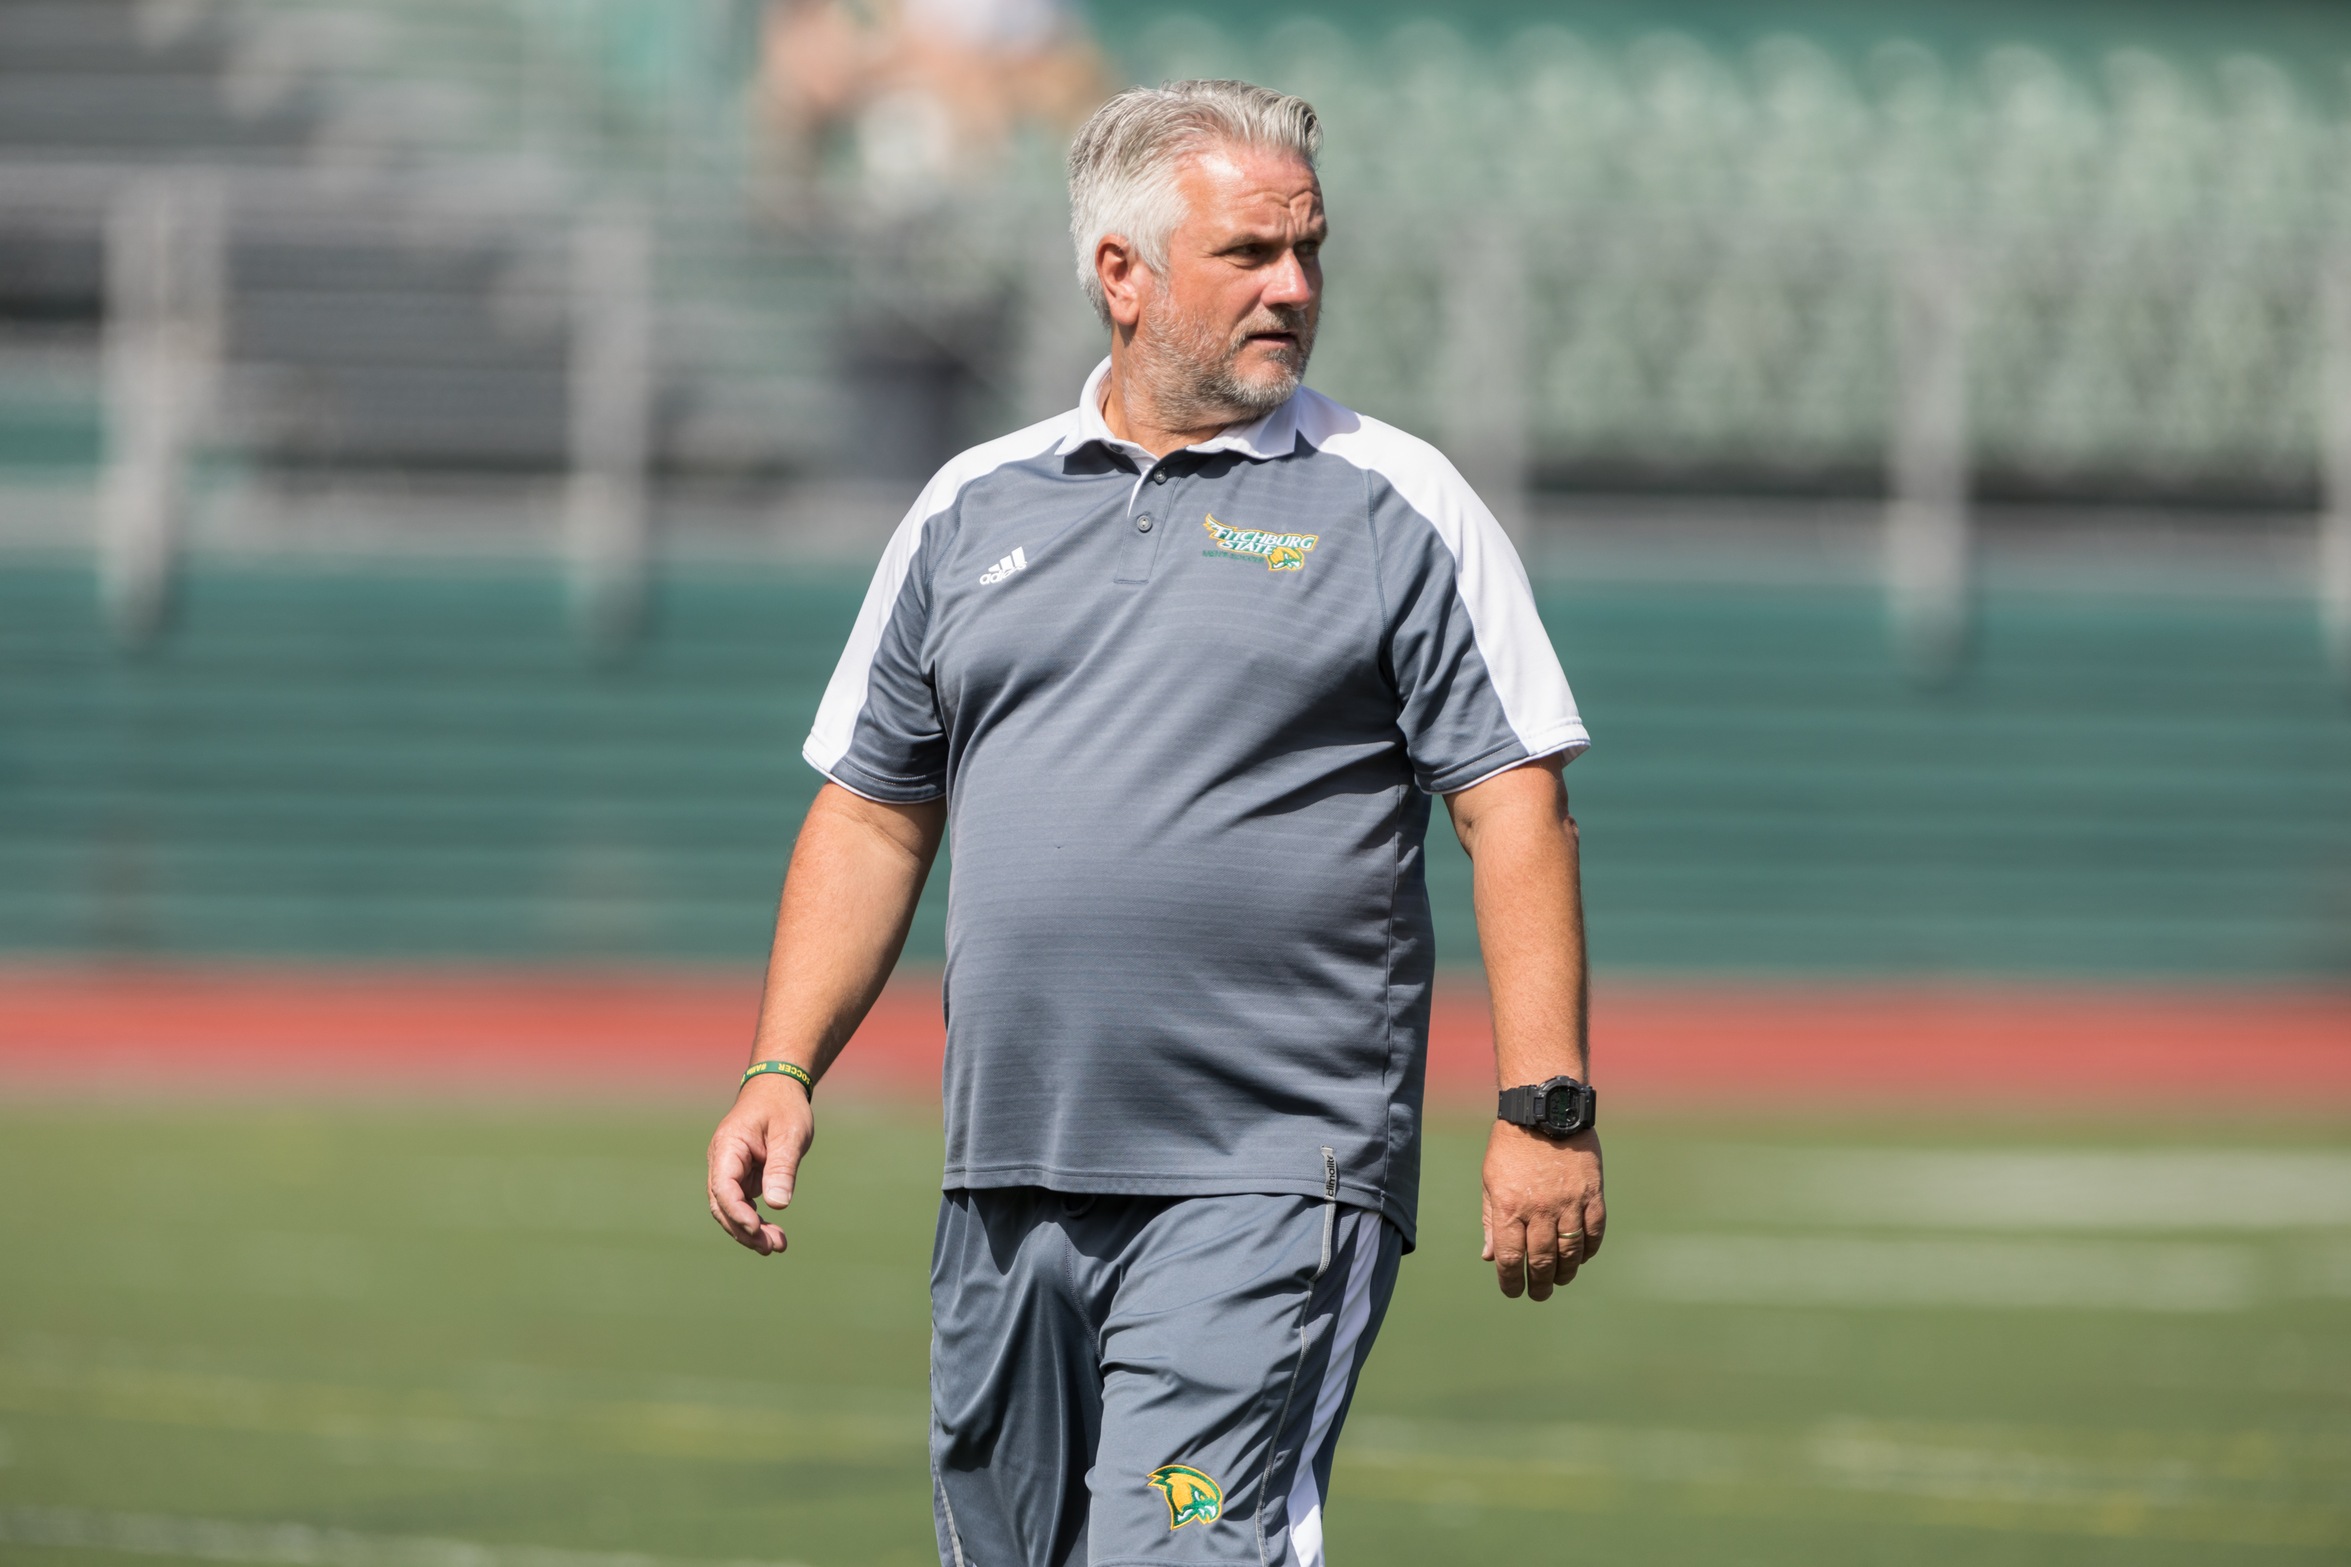 Thissen Announces Retirement from Fitchburg State